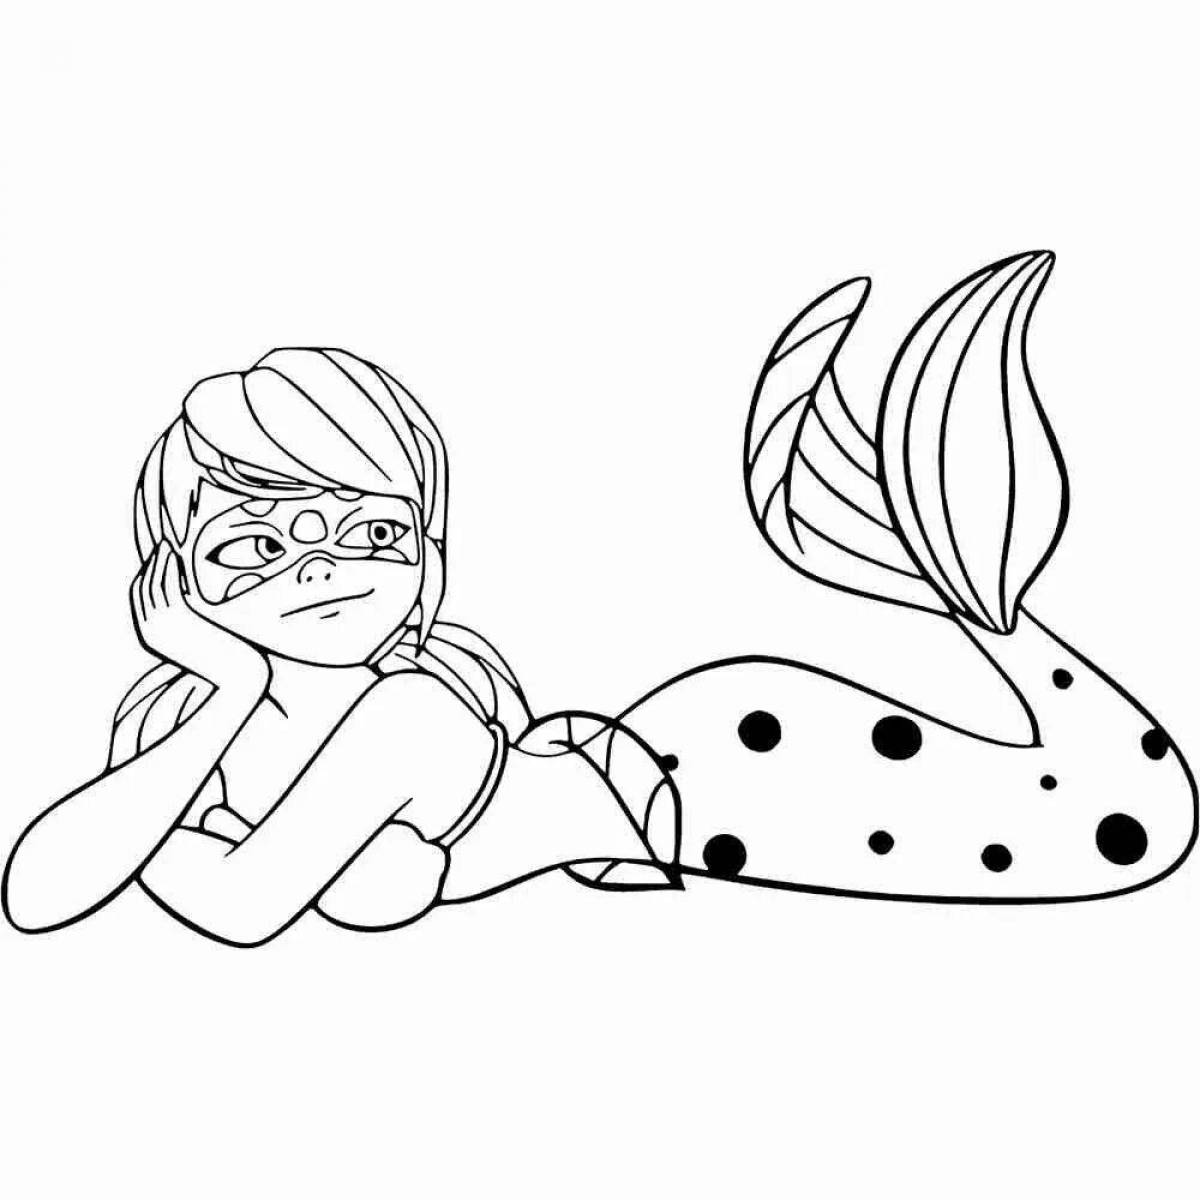 Colorful le bug coloring page